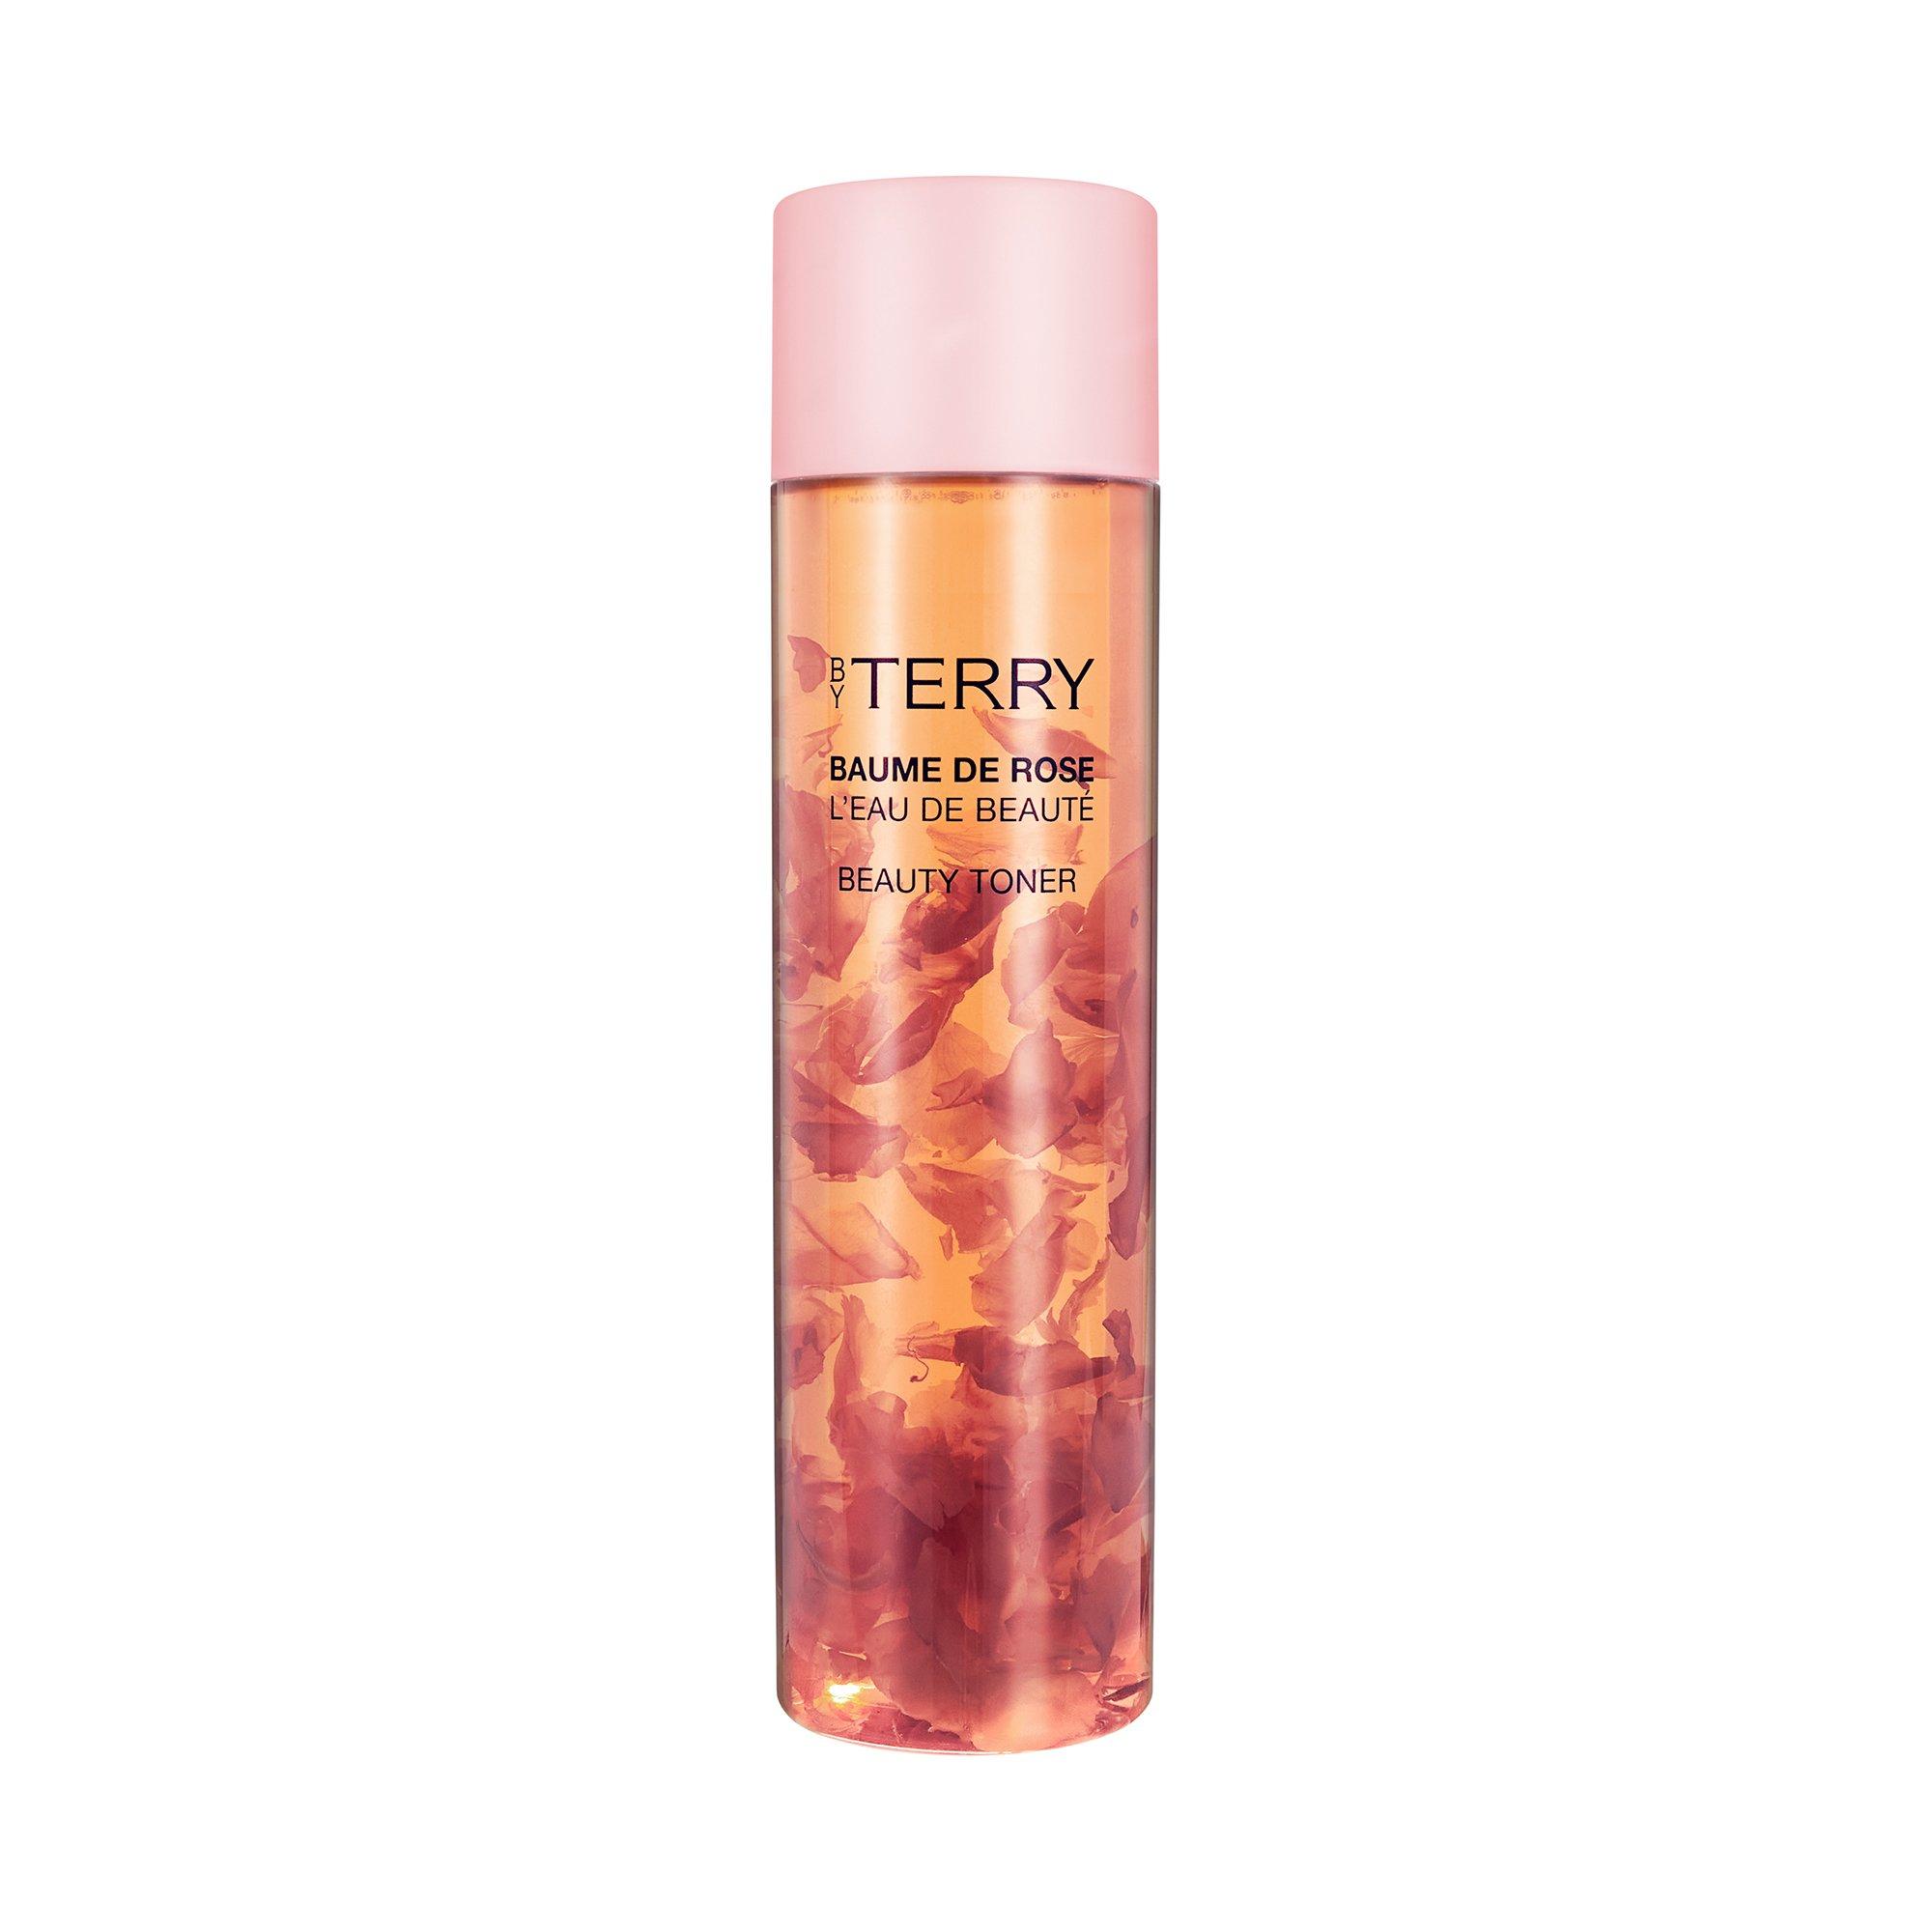 Image of BY TERRY Baume de Rose Beauty Toner - 200ml